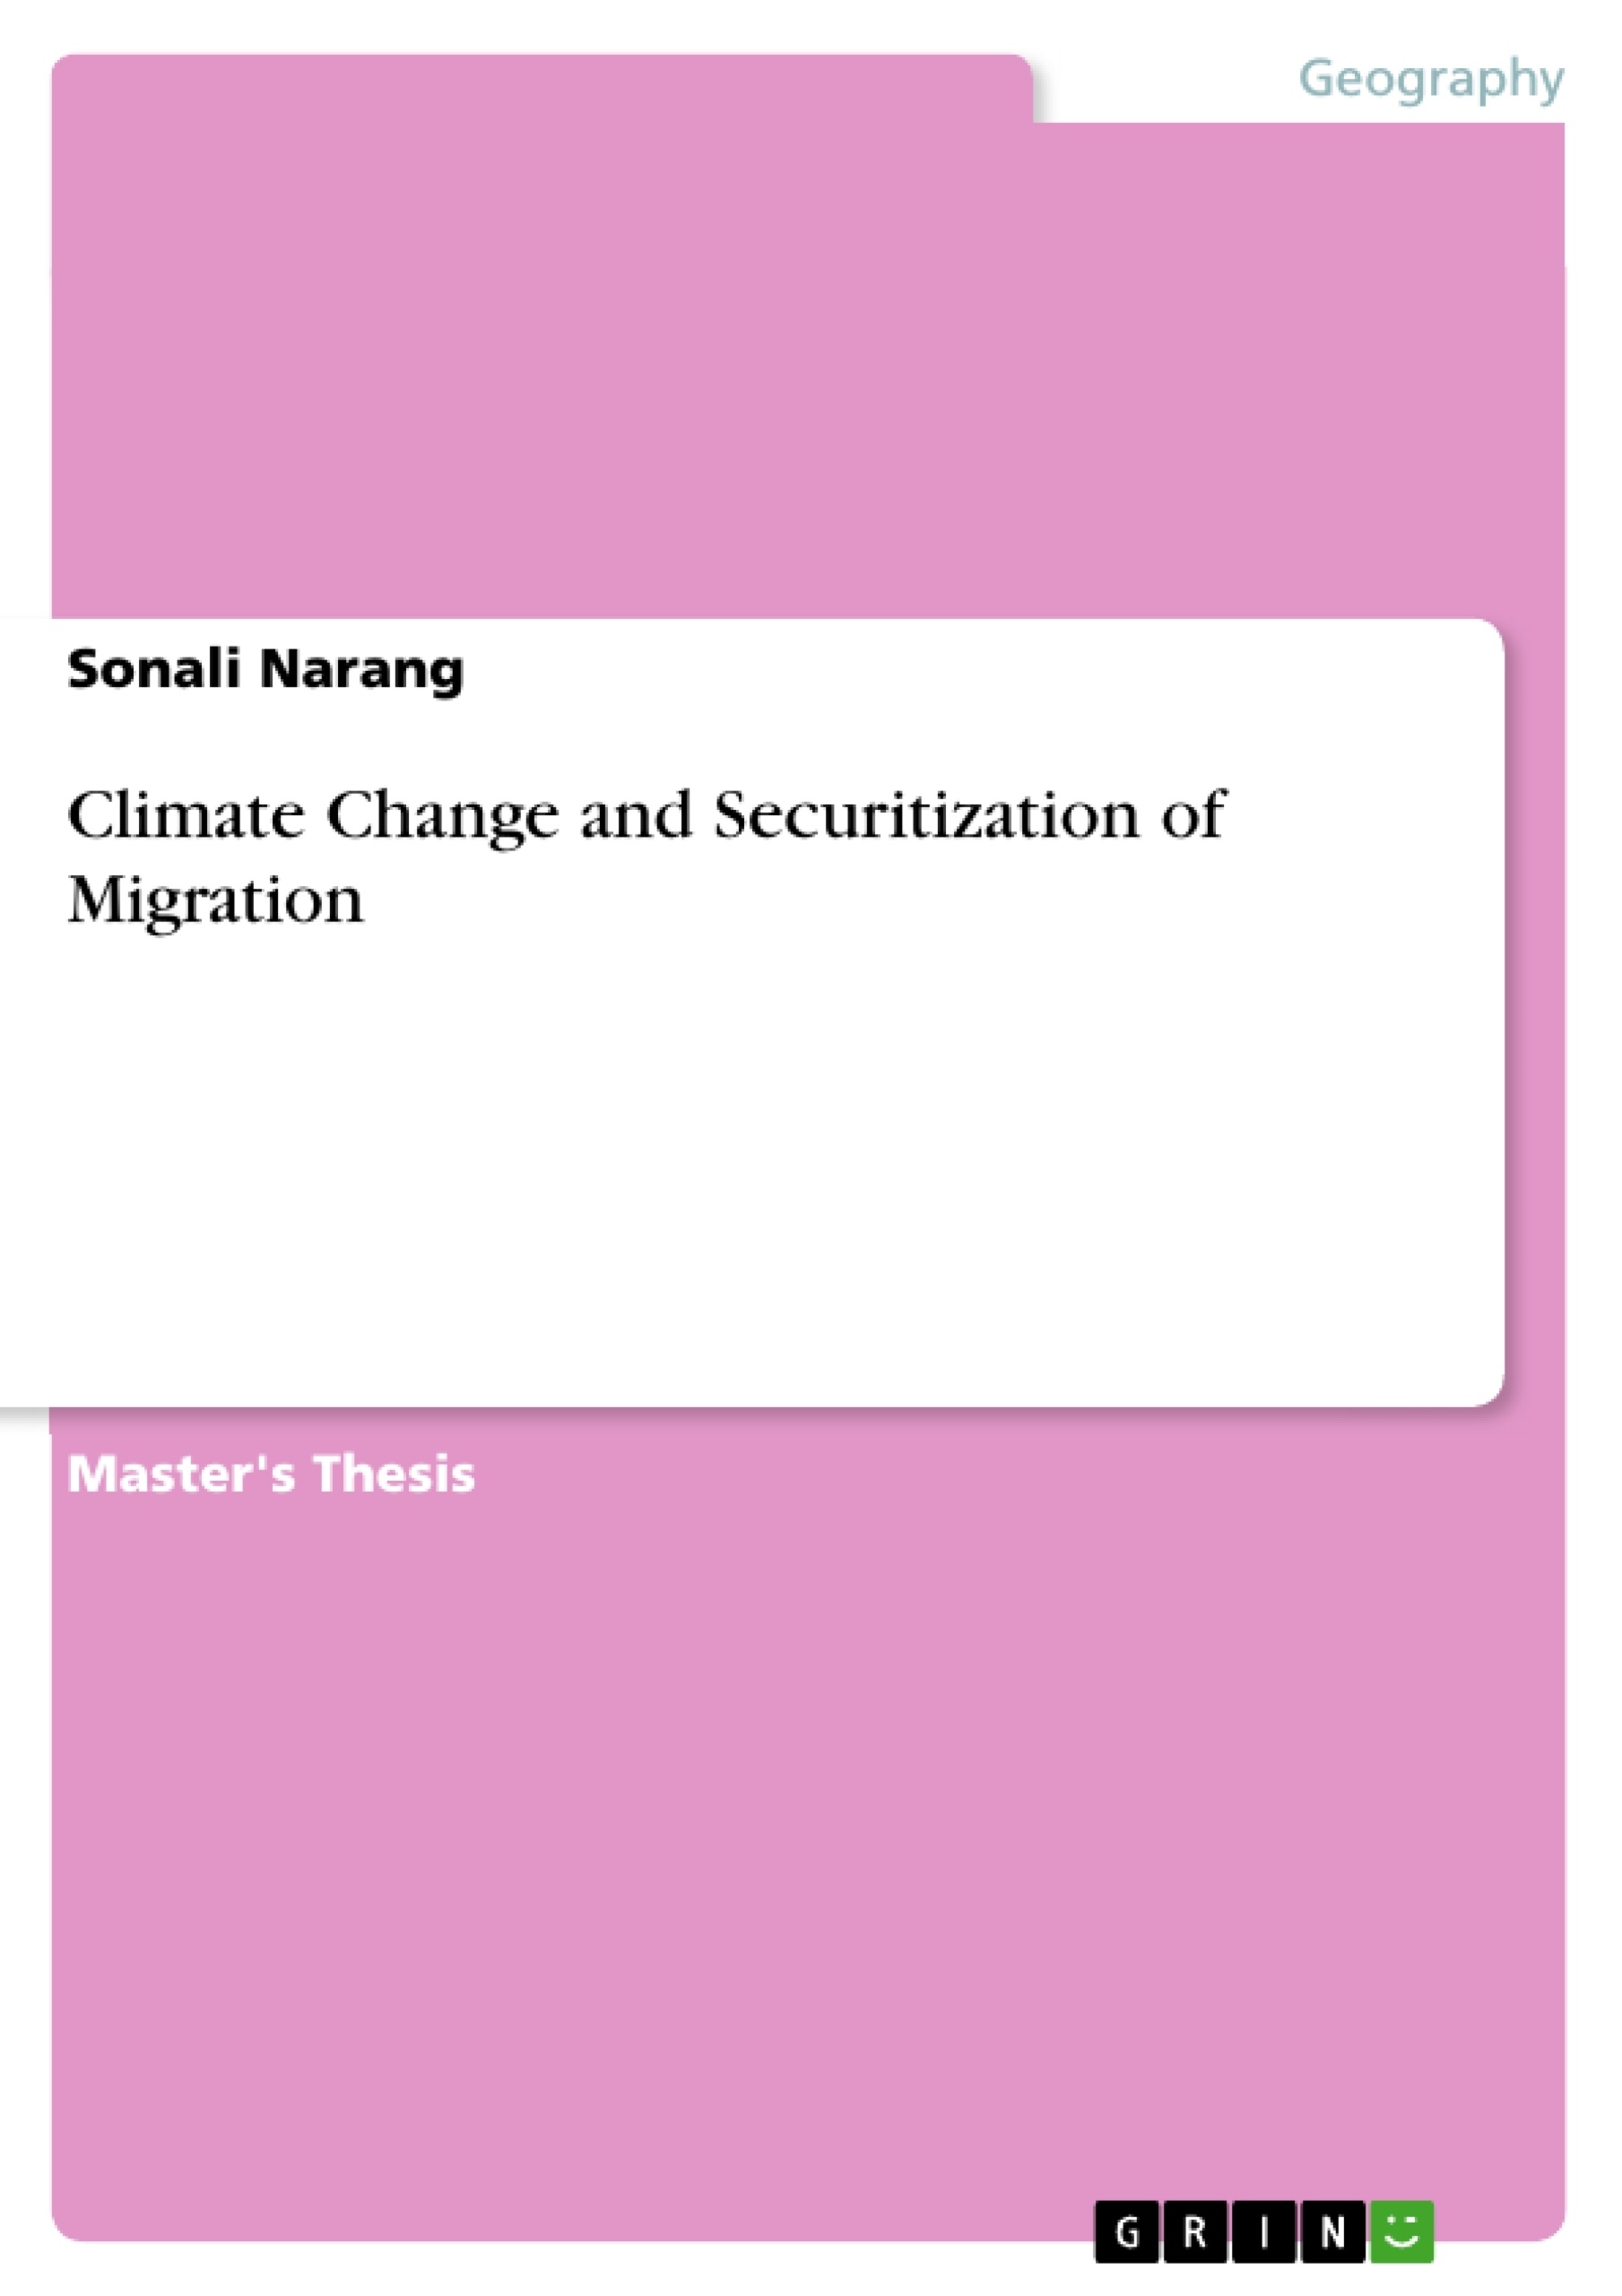 Title: Climate Change and Securitization of Migration